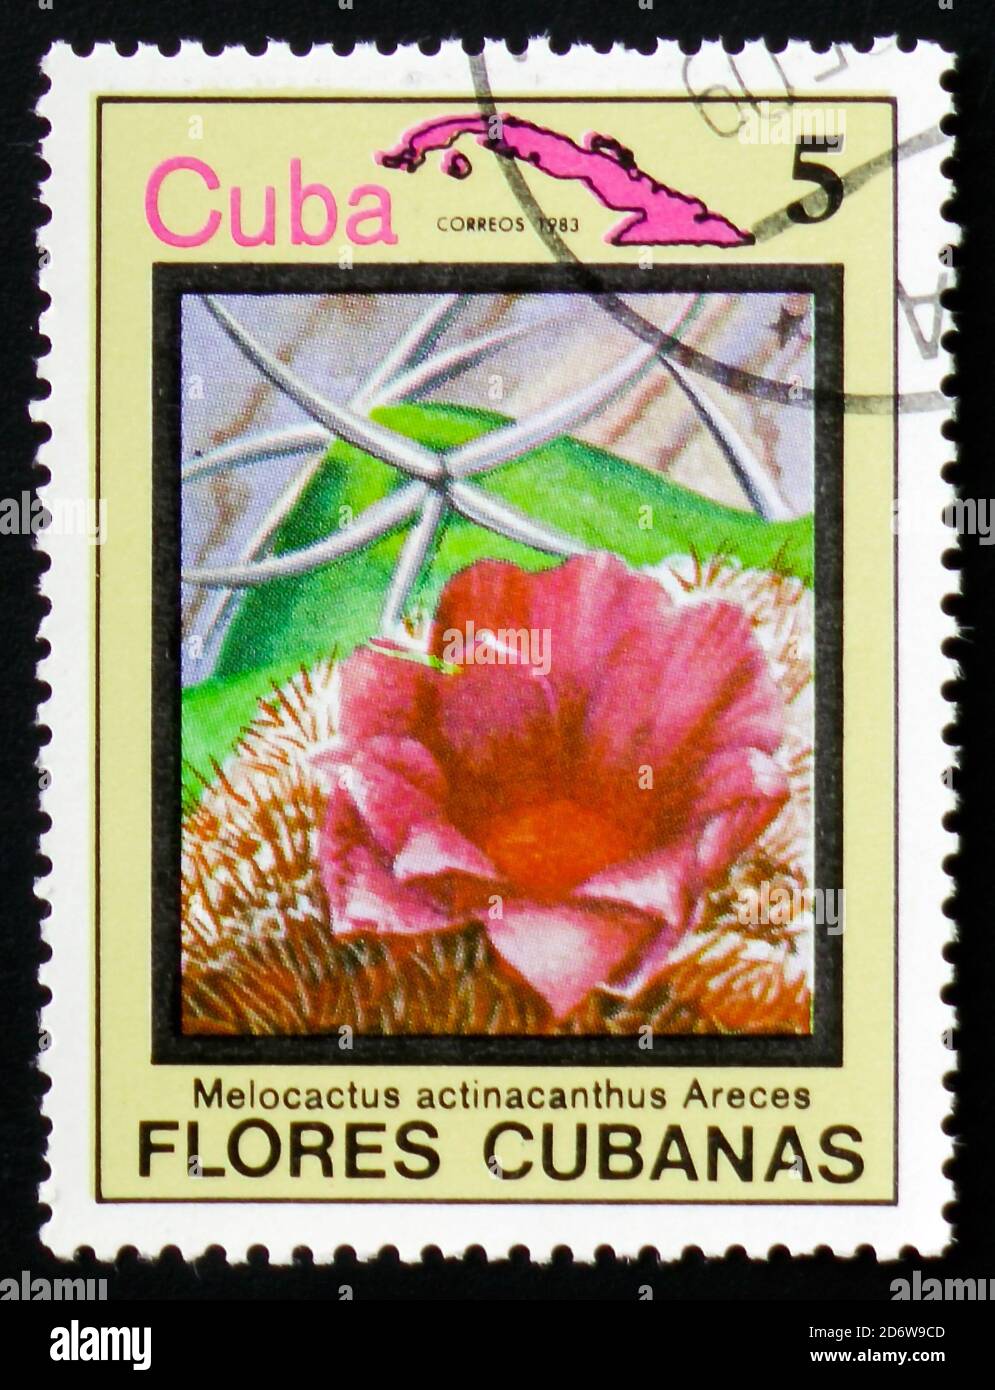 MOSCOW, RUSSIA - FEBRUARY 12, 2017: A stamp printed in Cuba shows Melocactus actinacanthus areces and map of Cuba, serie Flowers of Cuba, circa 1983 Stock Photo